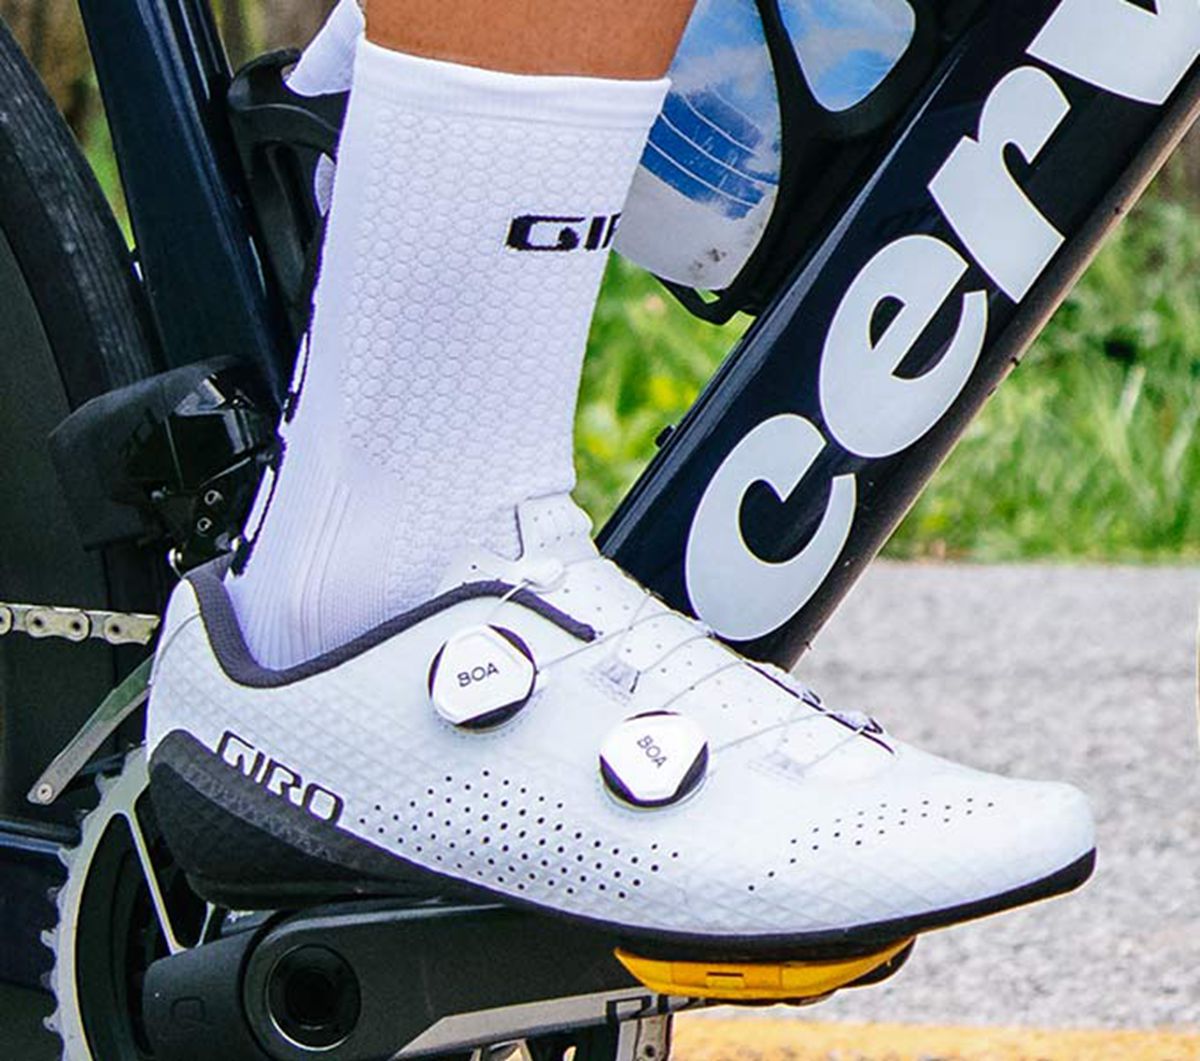 Giro-Regime-high-performance-road-shoes-at-a-mid-level-price_on-bike.jpg